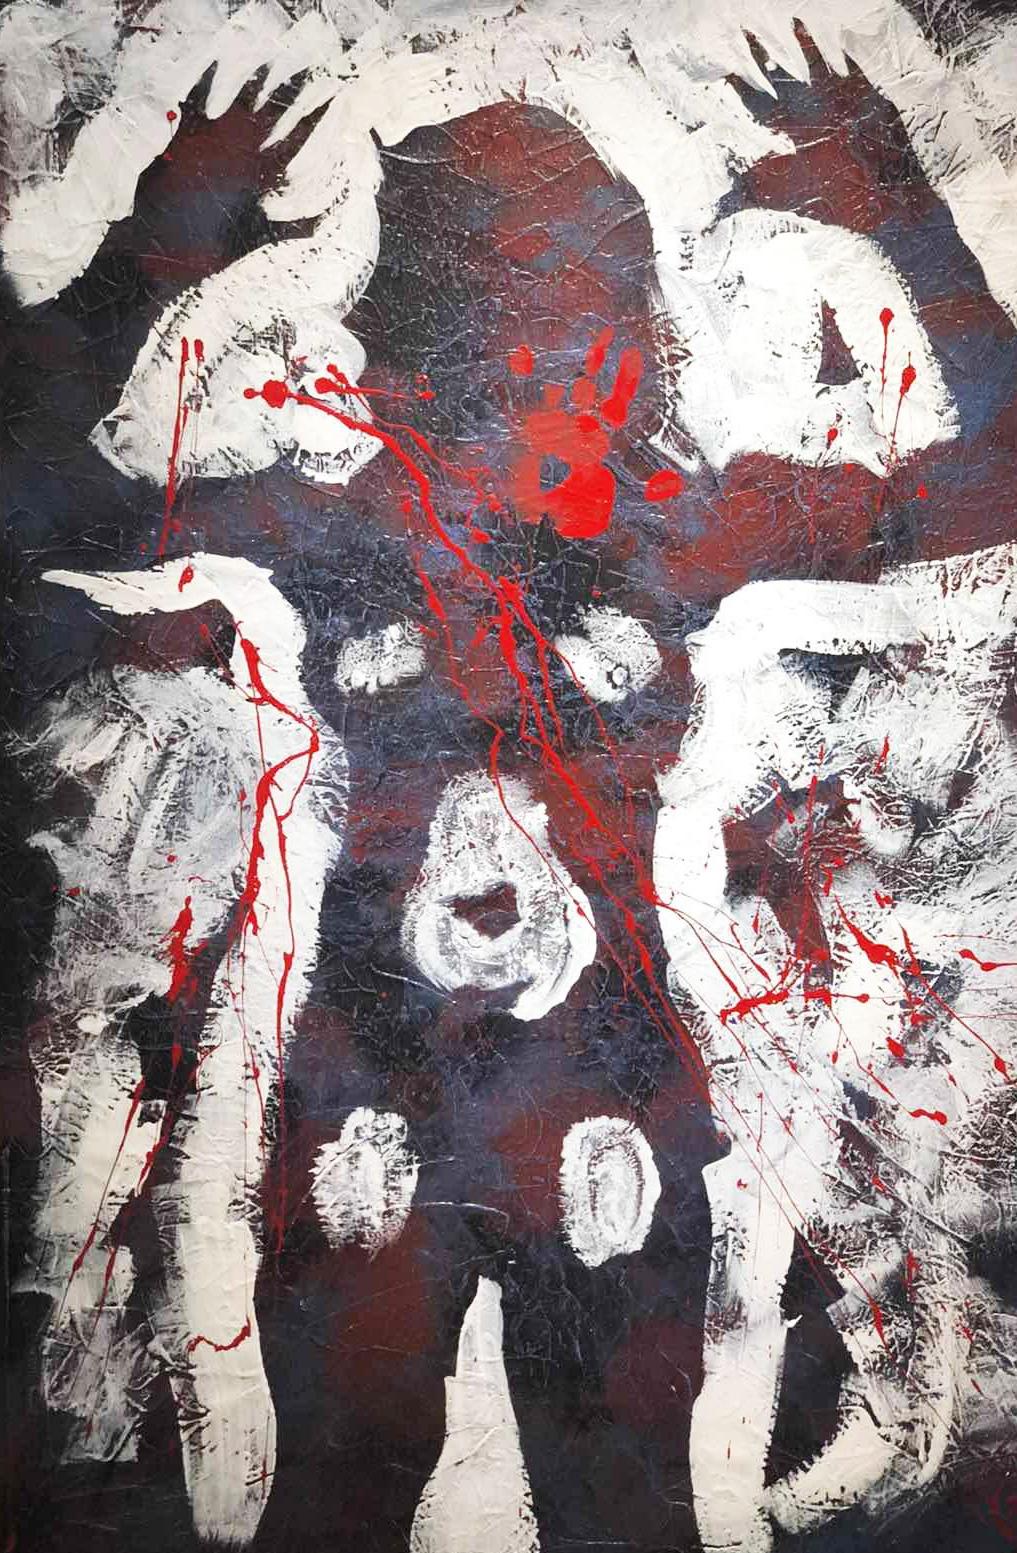 MARRIAGE CONTRACT. 2019
140x100 cm
Acrylic on canvas

This art work was created by the artist during the performance at the opening solo exhibition "The AnOther Skin" by Vasili Zianko in Vienna in December 2019 (Desiderio Gallery Nº1 Art Lounge).